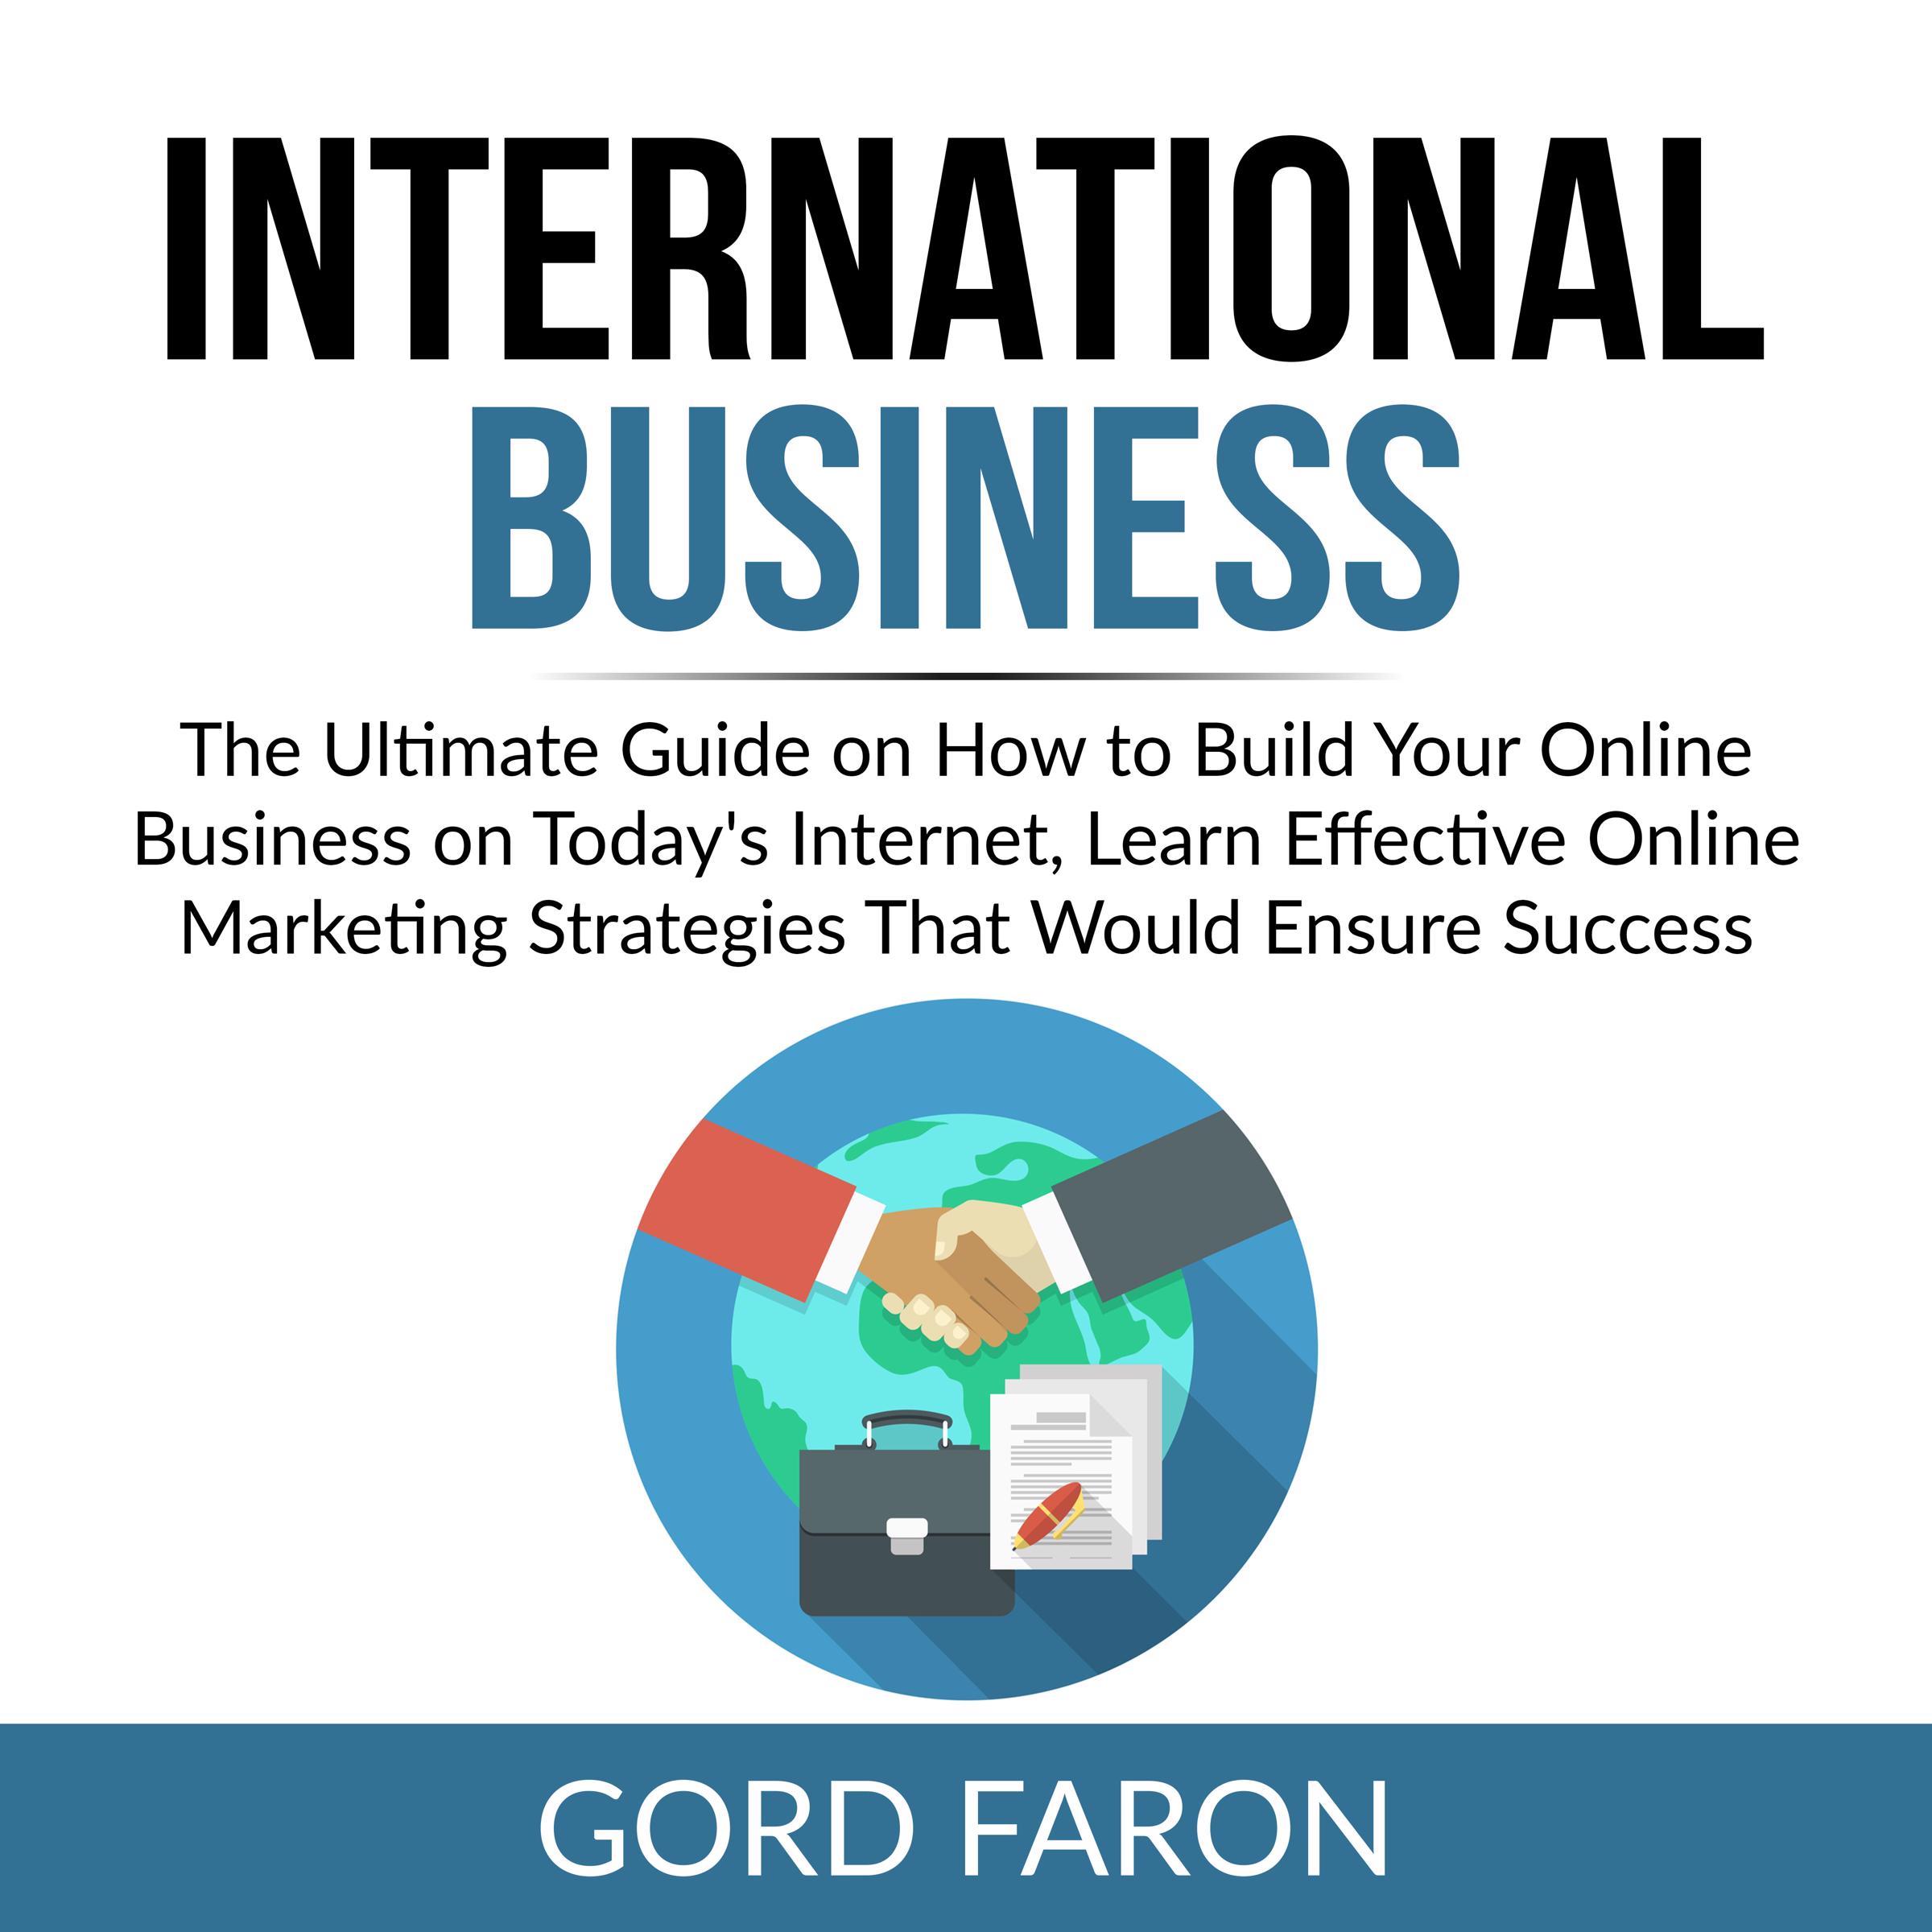 International Business: The Ultimate Guide on How to Build Your Online Business on Today's Internet, Learn Effective Online Marketing Strategies That Would Ensure Success